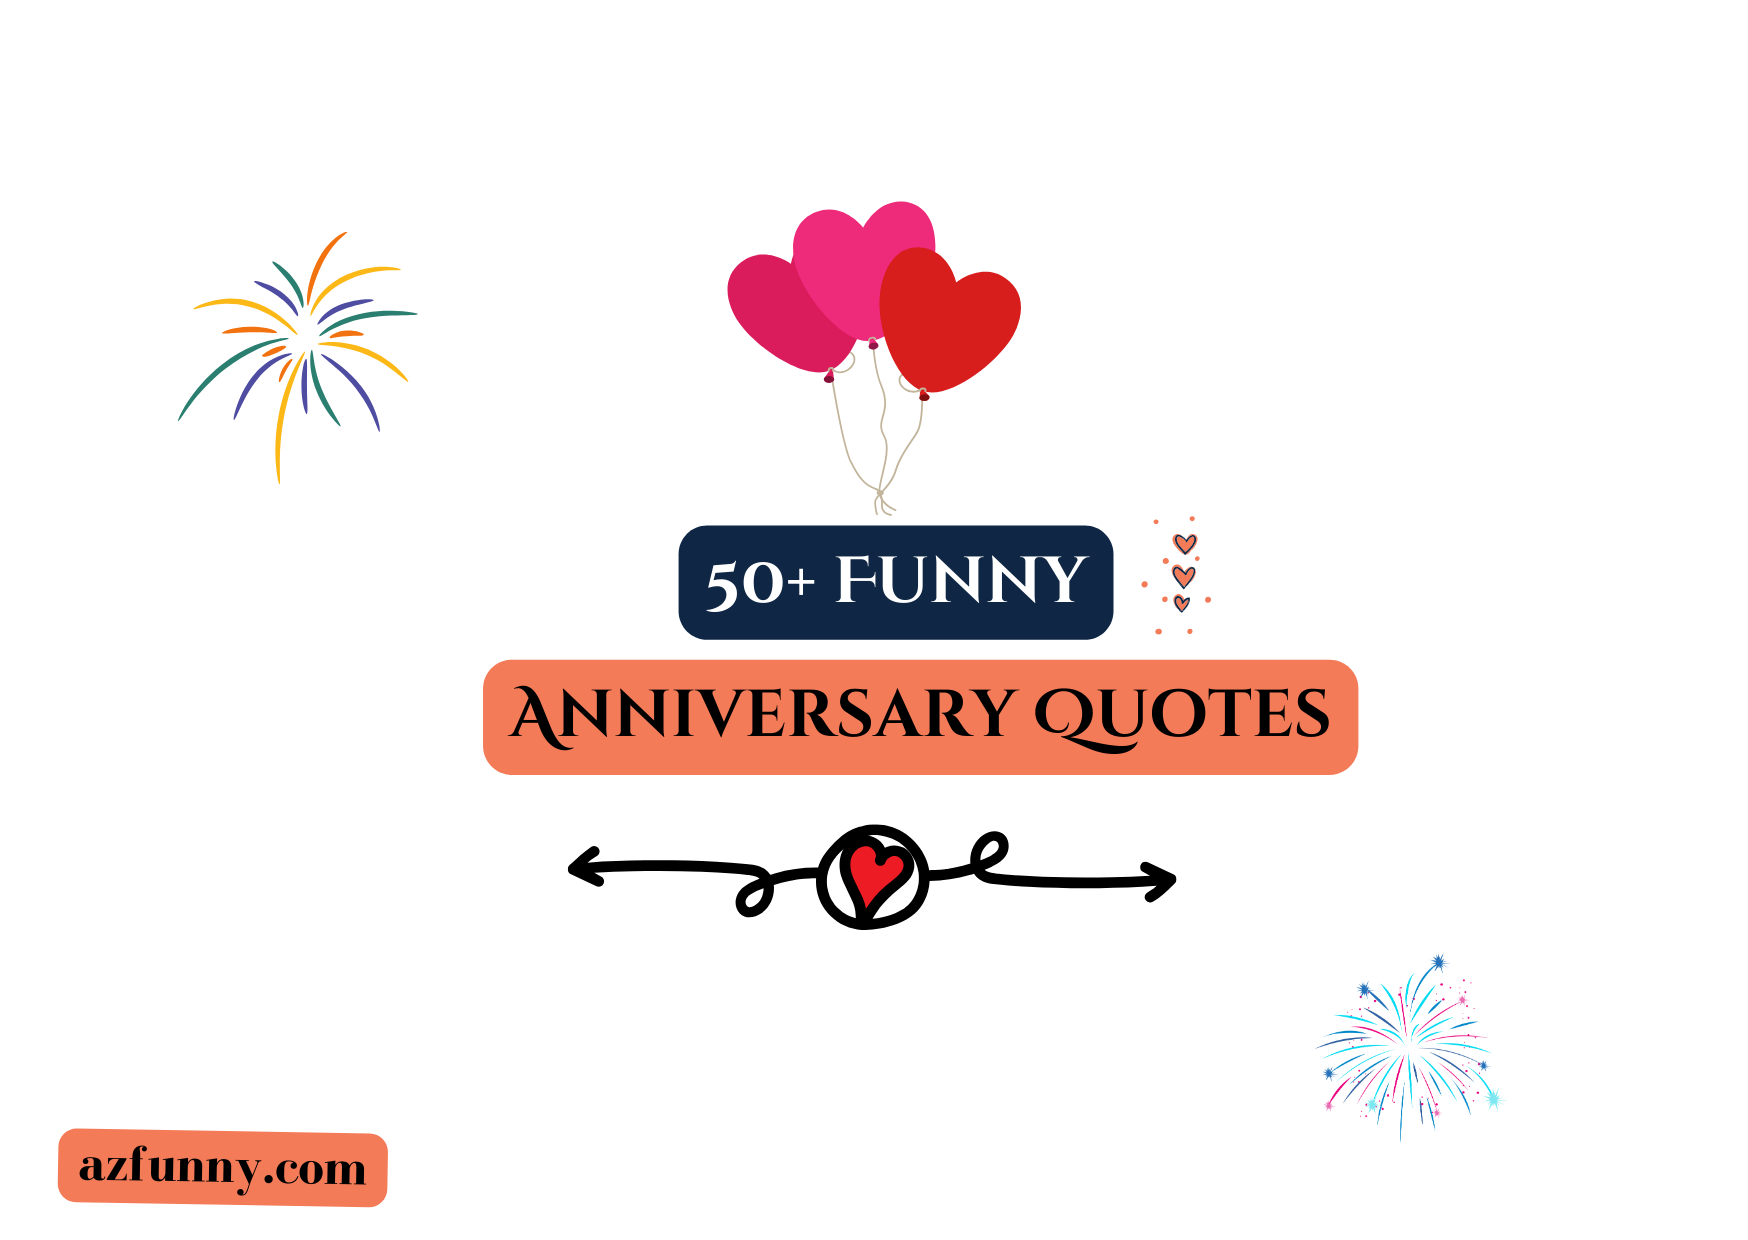 50+ Funny Anniversary Quotes (Love, Laughter,  Lightheartedness)